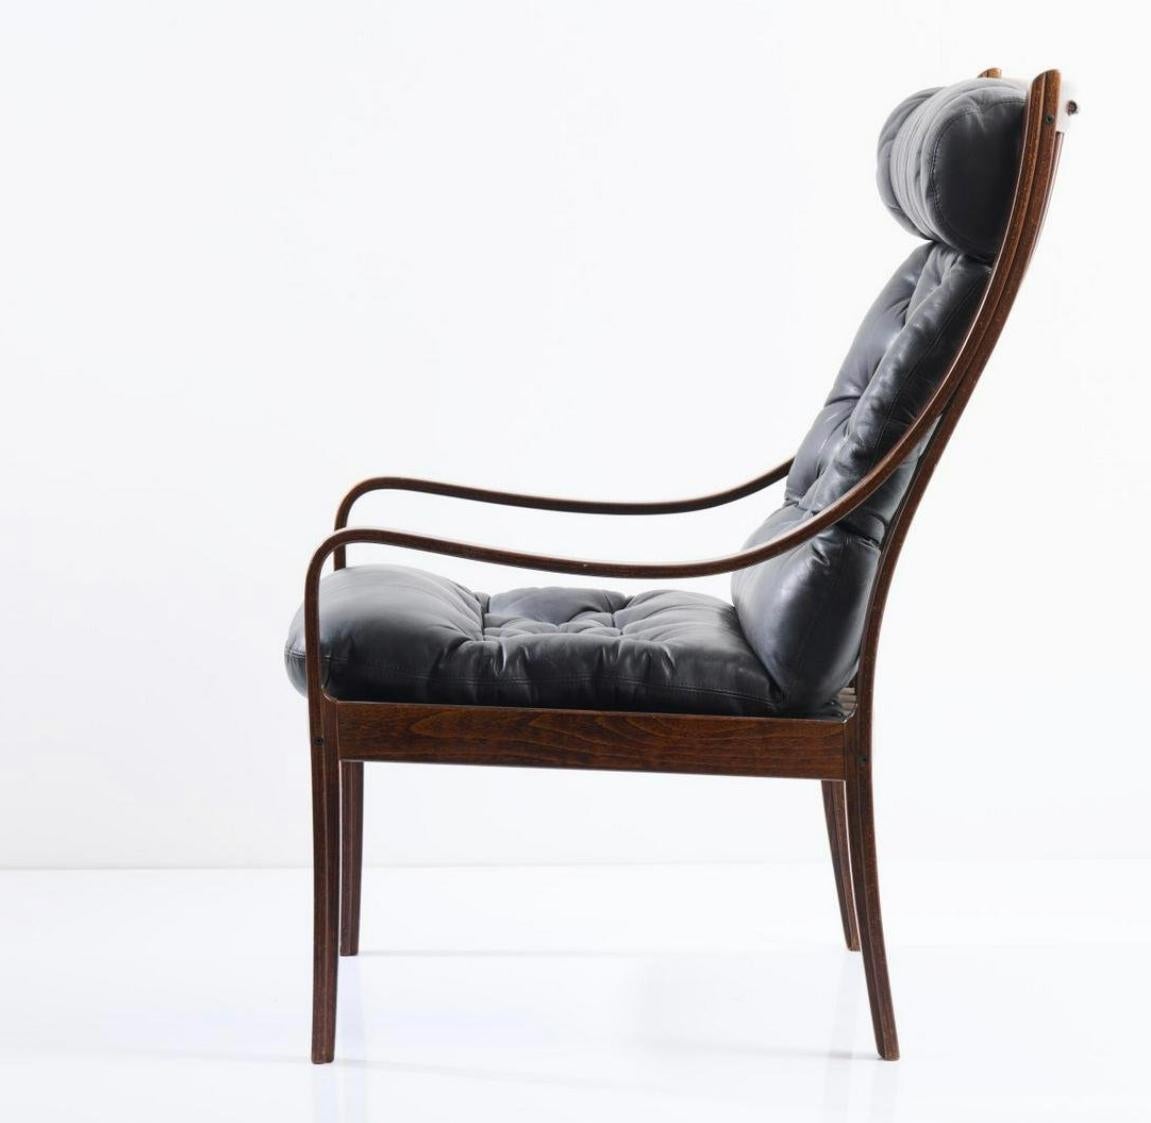 Mid-Century Modern Highback Black Leather Armchair by Fredrik Kayser for Vatne, Norway, 1960s For Sale